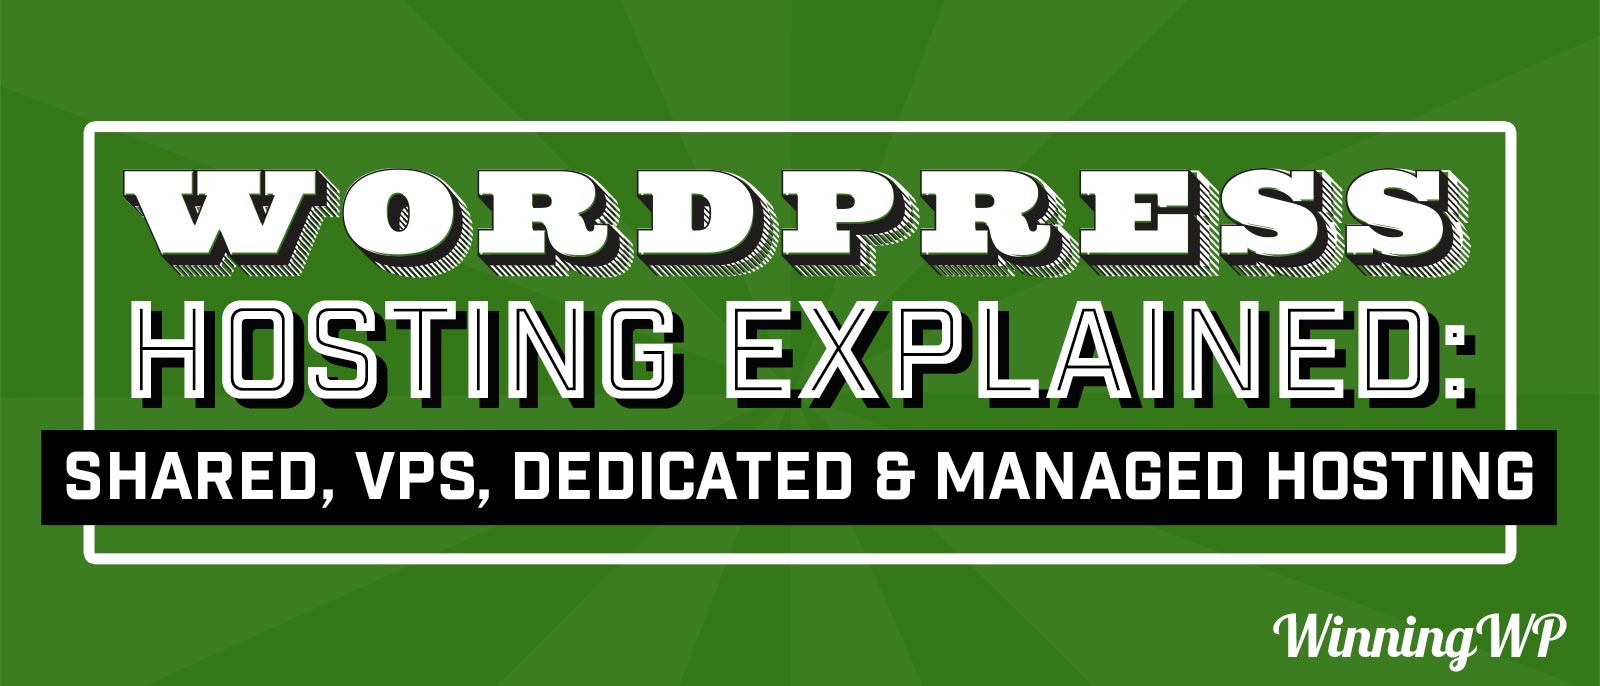 WordPress Hosting Explained - Shared, VPS, Dedicated and Managed